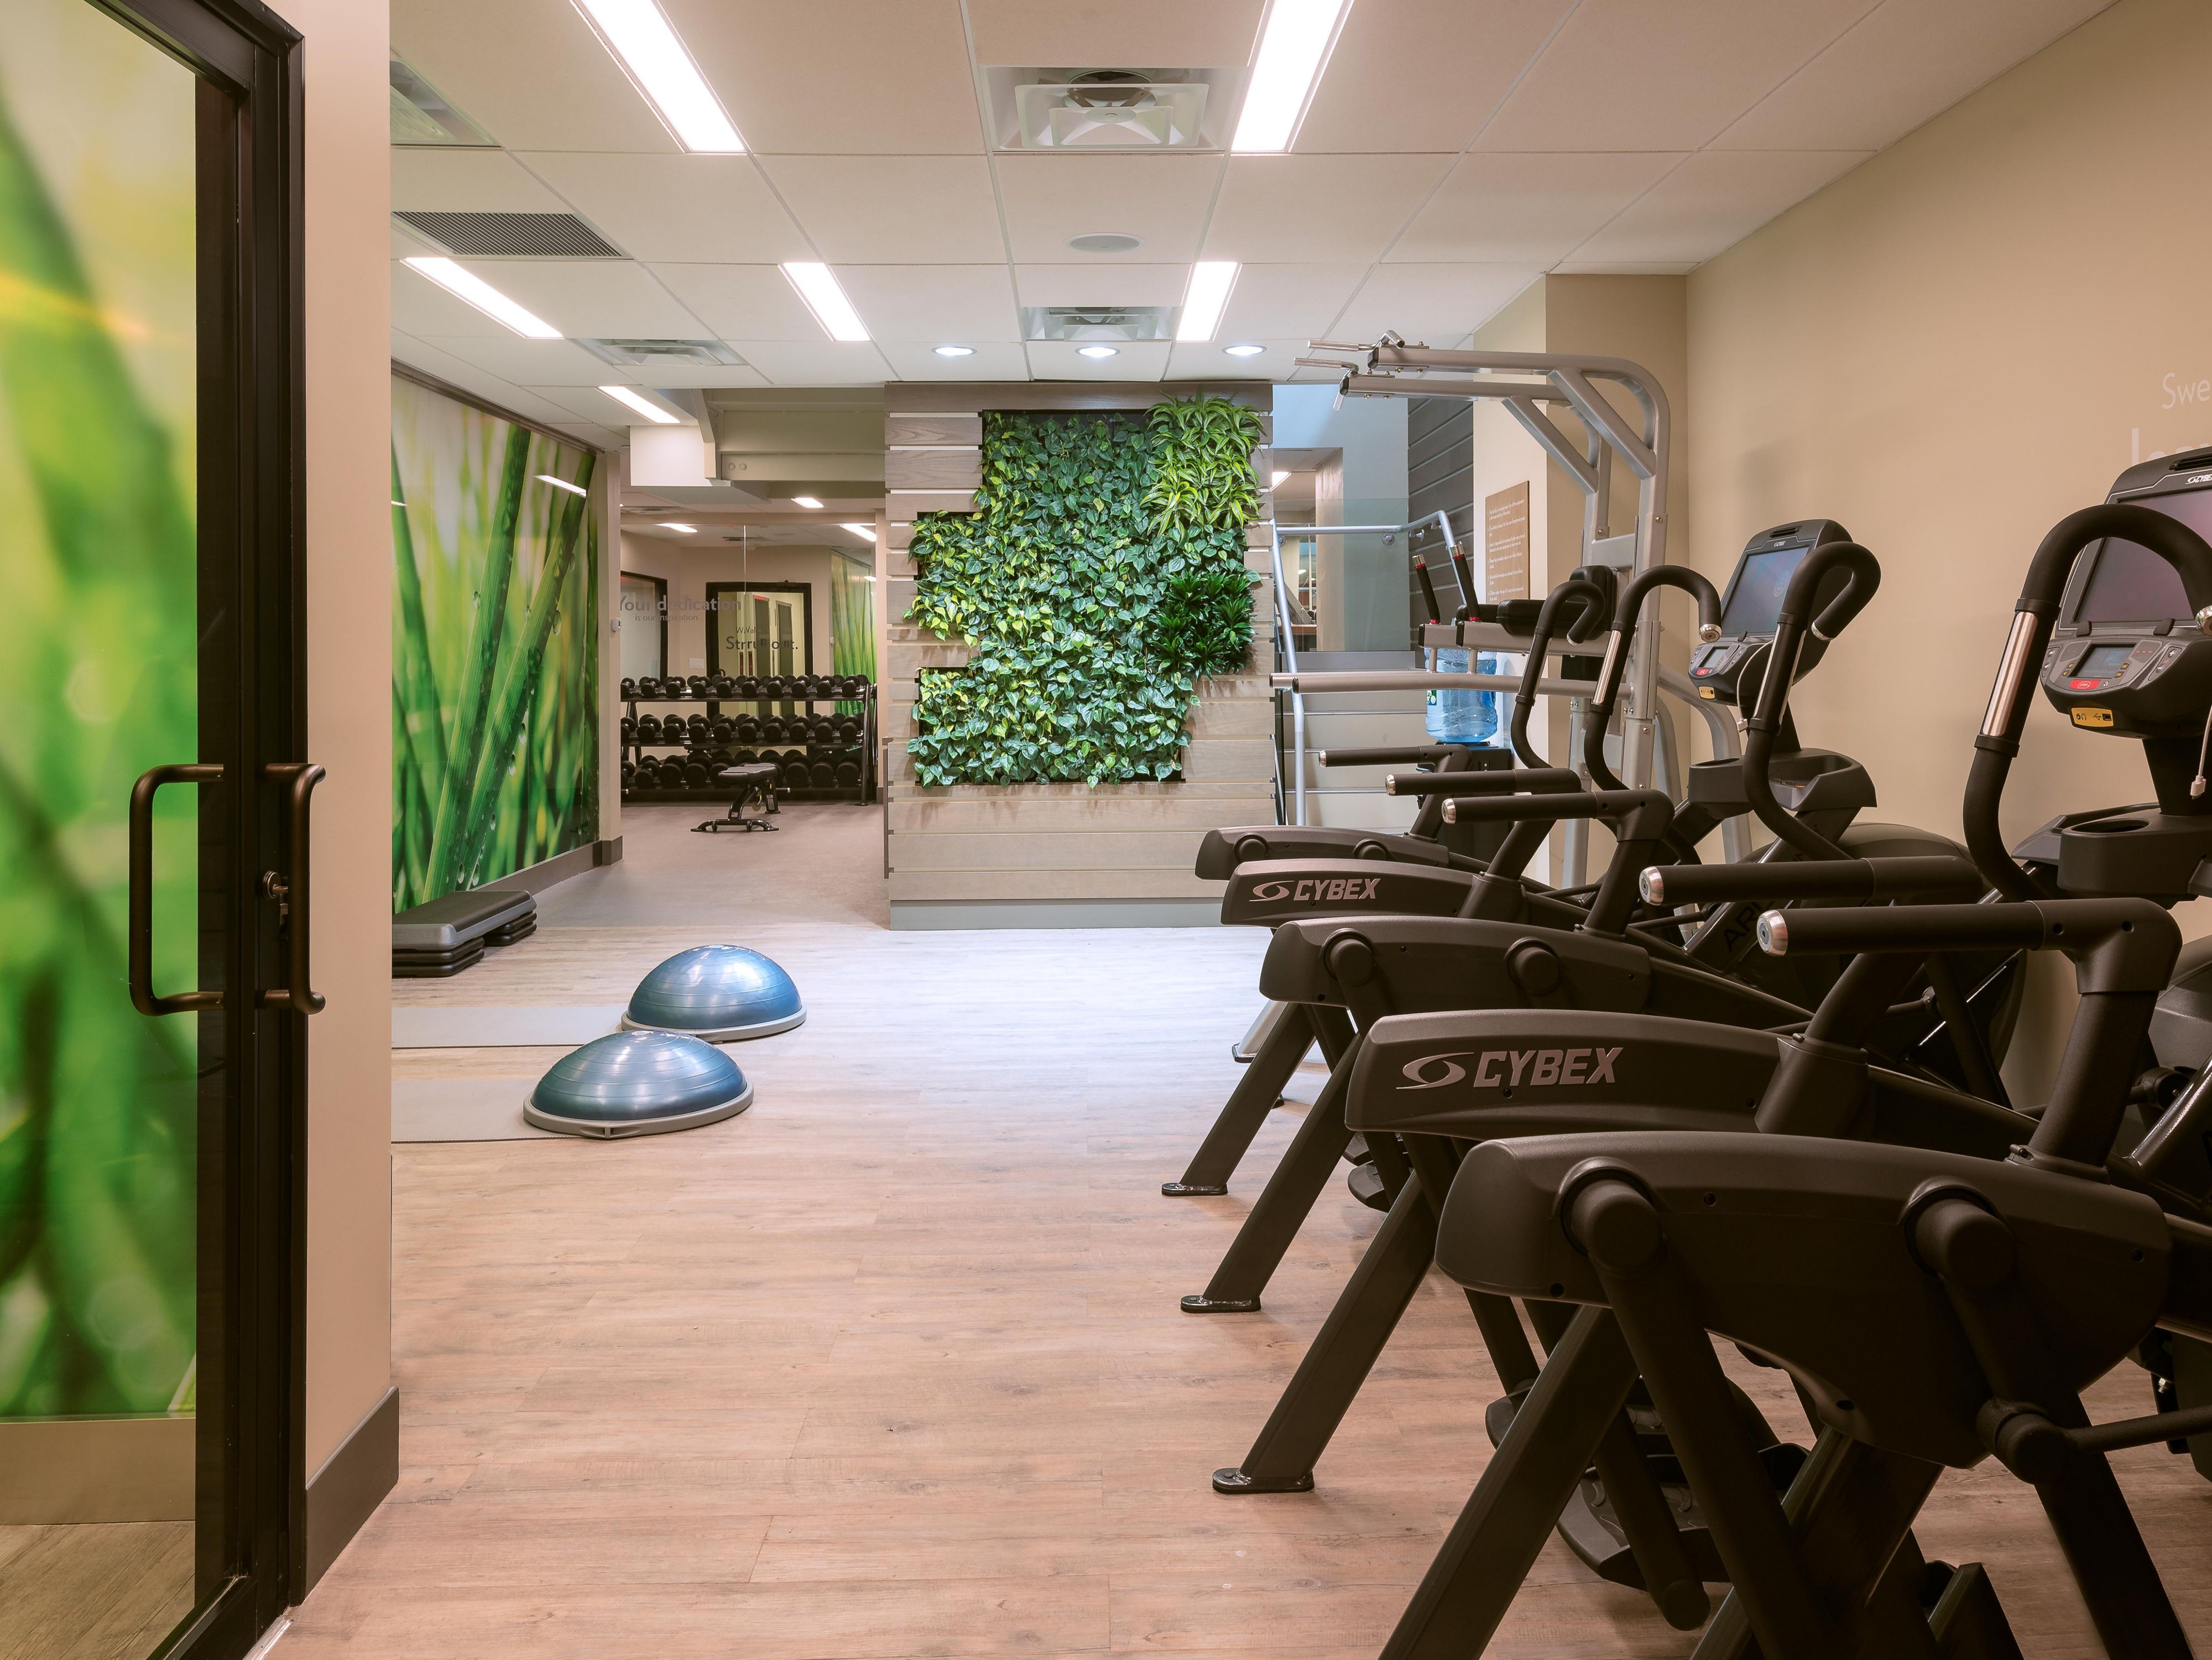 Maintaining a healthy lifestyle has never been easier. Our gym is open 24/7, which makes it a snap to exercise whenever your schedule permits. Located near the lobby, our hotel's athletic studio has everything you need to get in full-body workouts or train for the Brooklyn Marathon, including cardio machines and weights for strength training.